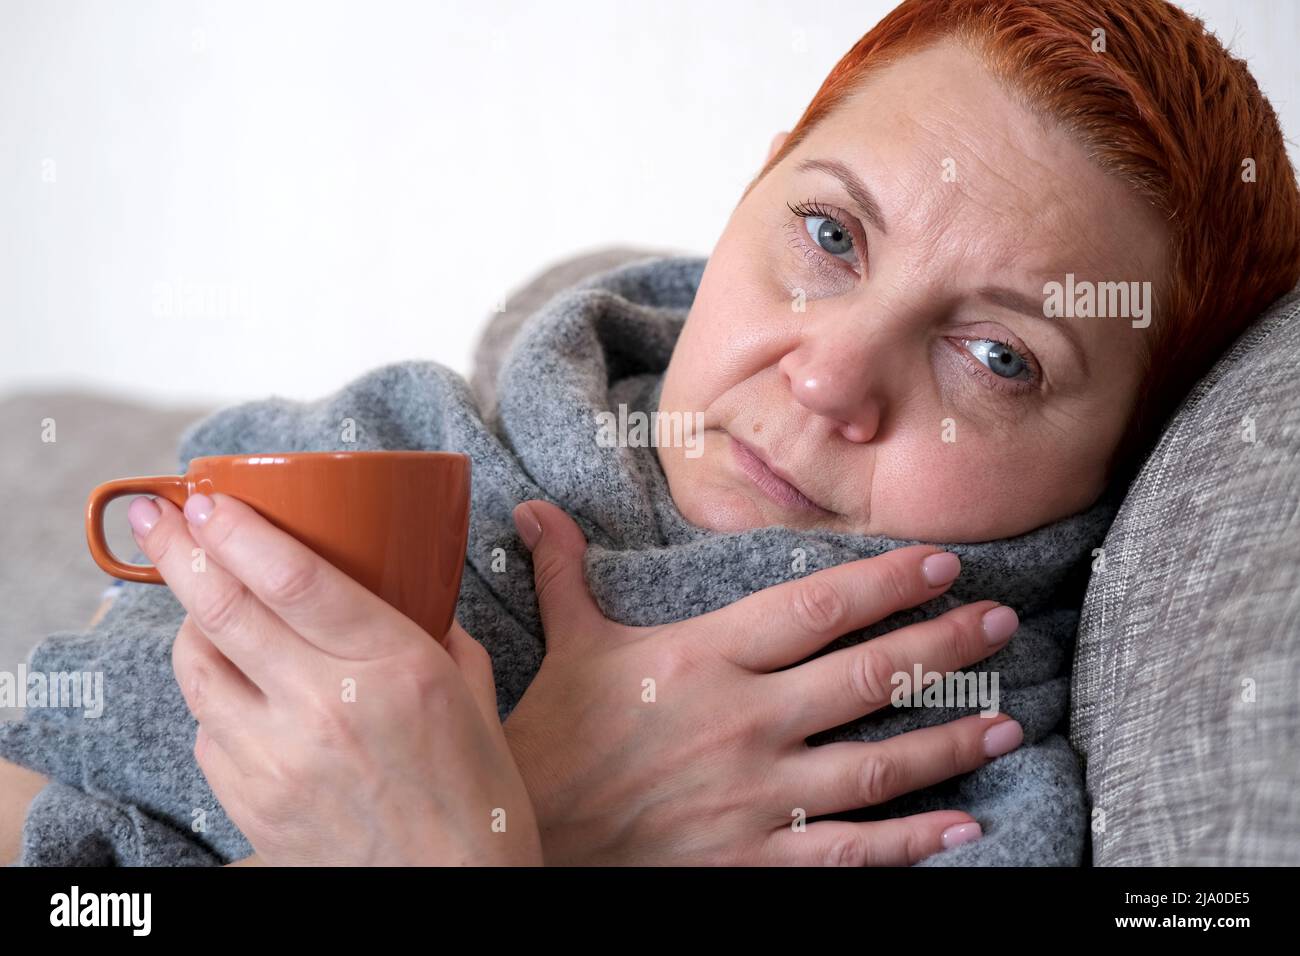 Cold and flu. Woman blowing her nose with a tissue. Stock Photo